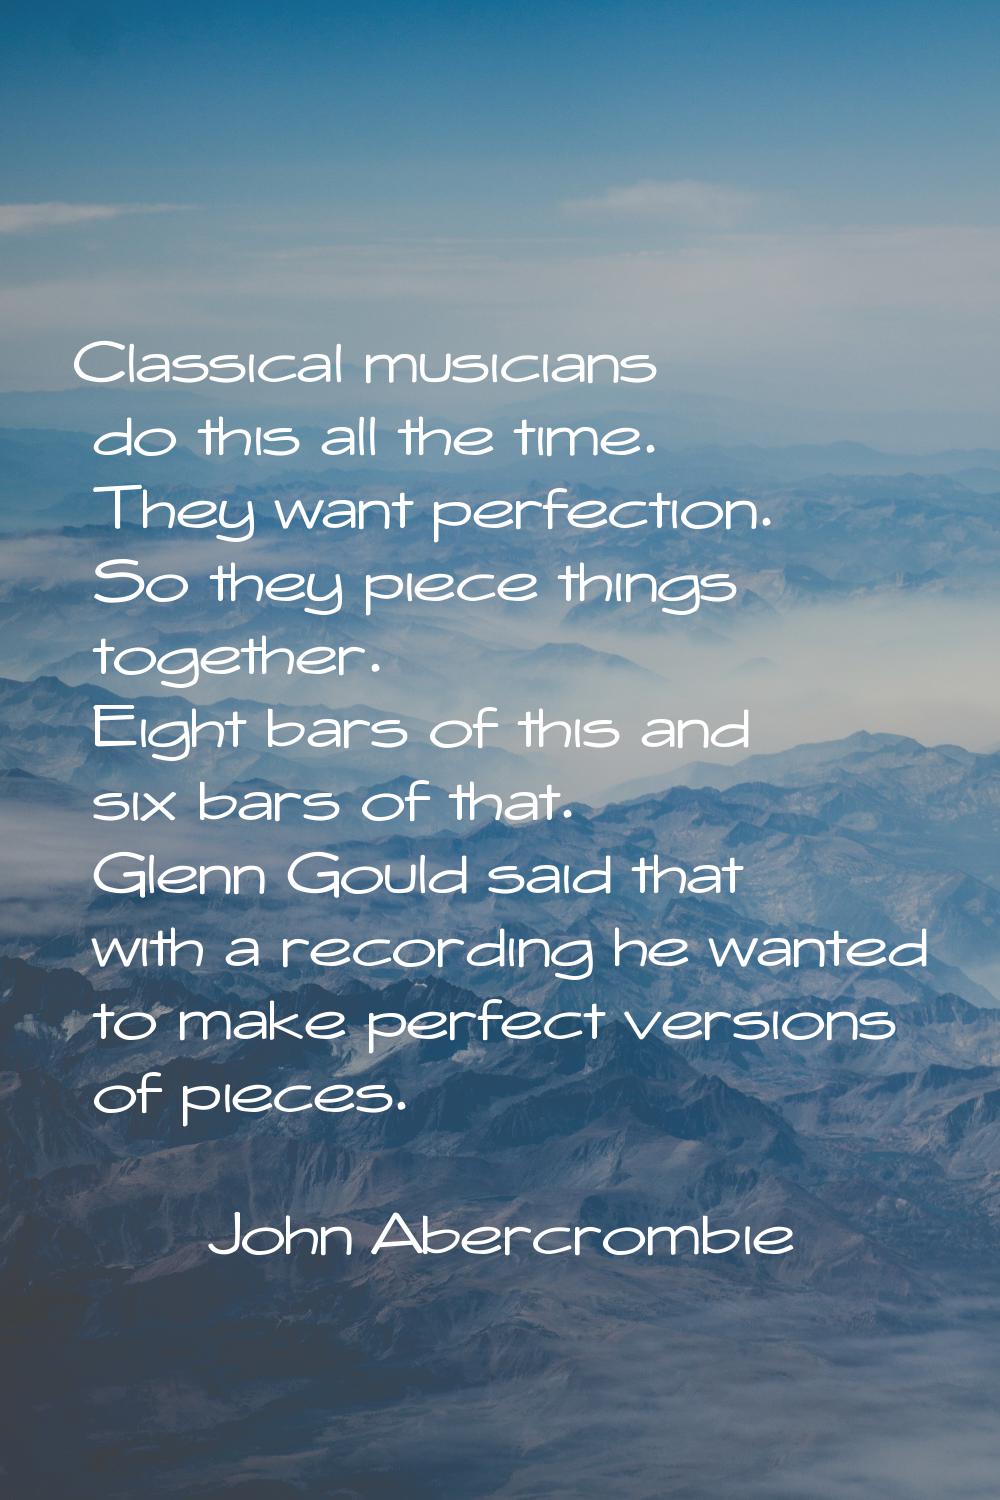 Classical musicians do this all the time. They want perfection. So they piece things together. Eigh